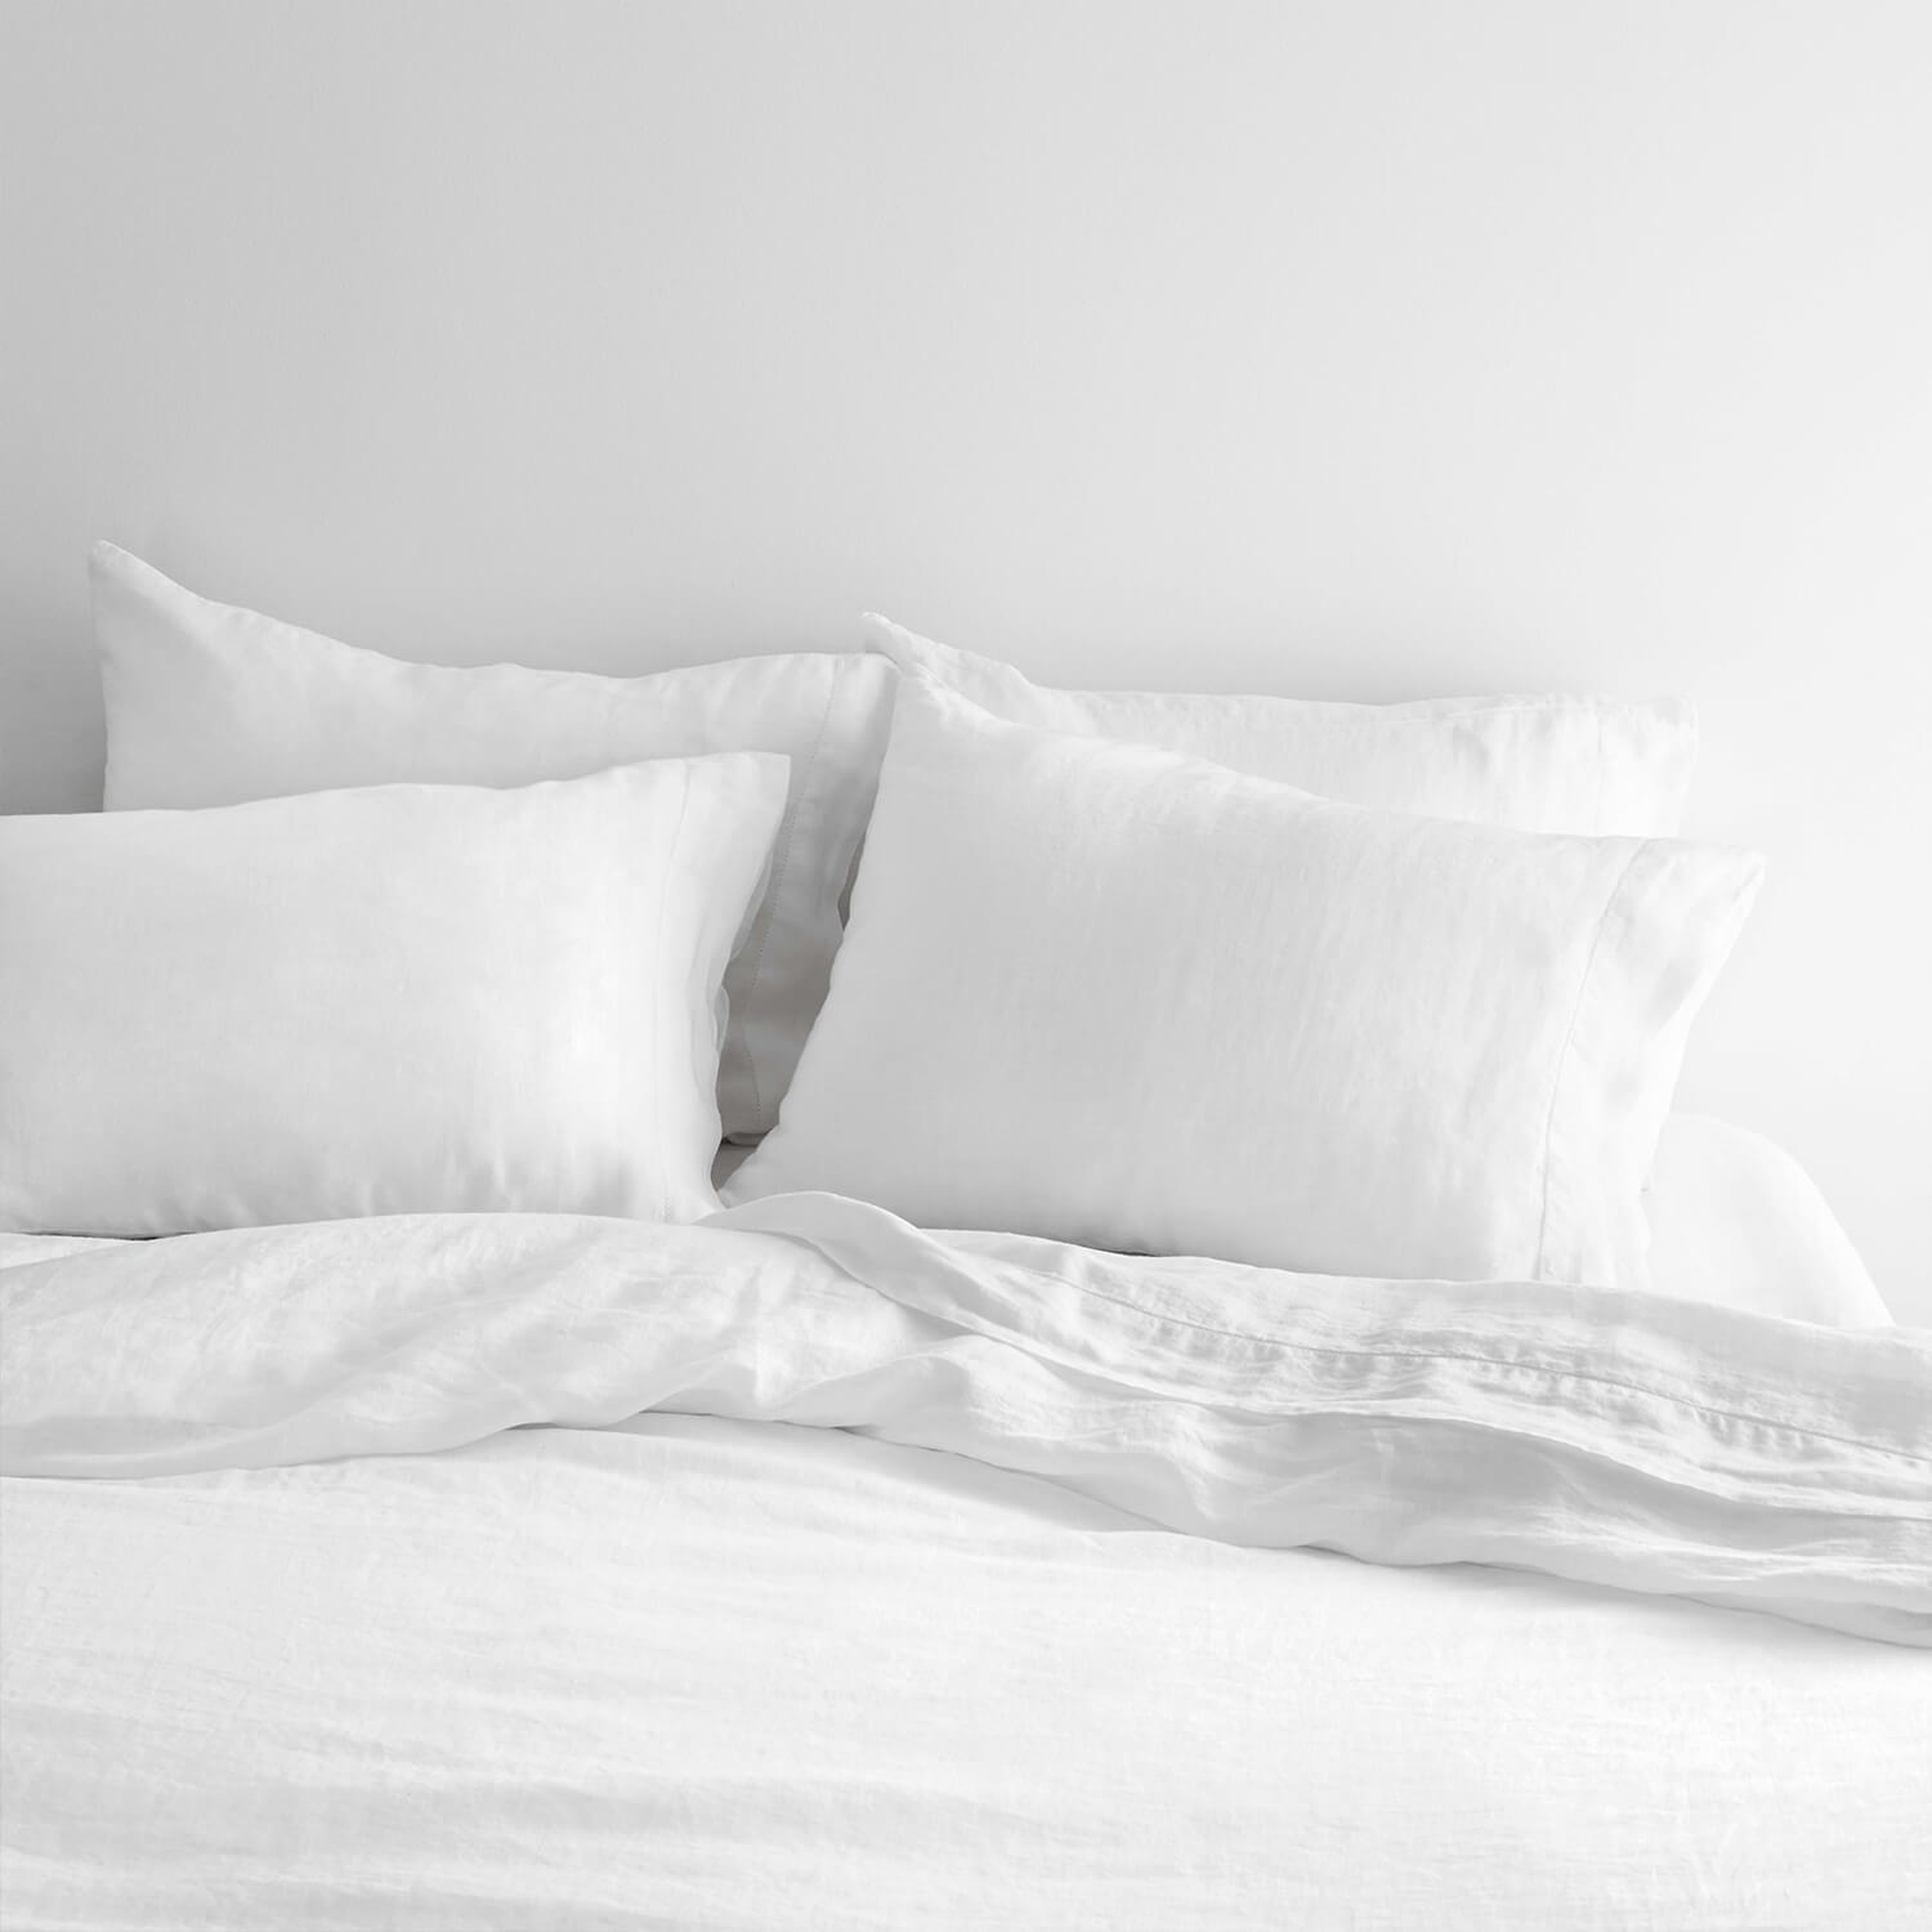 Stonewashed Linen Bed Bundle - White - King By The Citizenry - The Citizenry